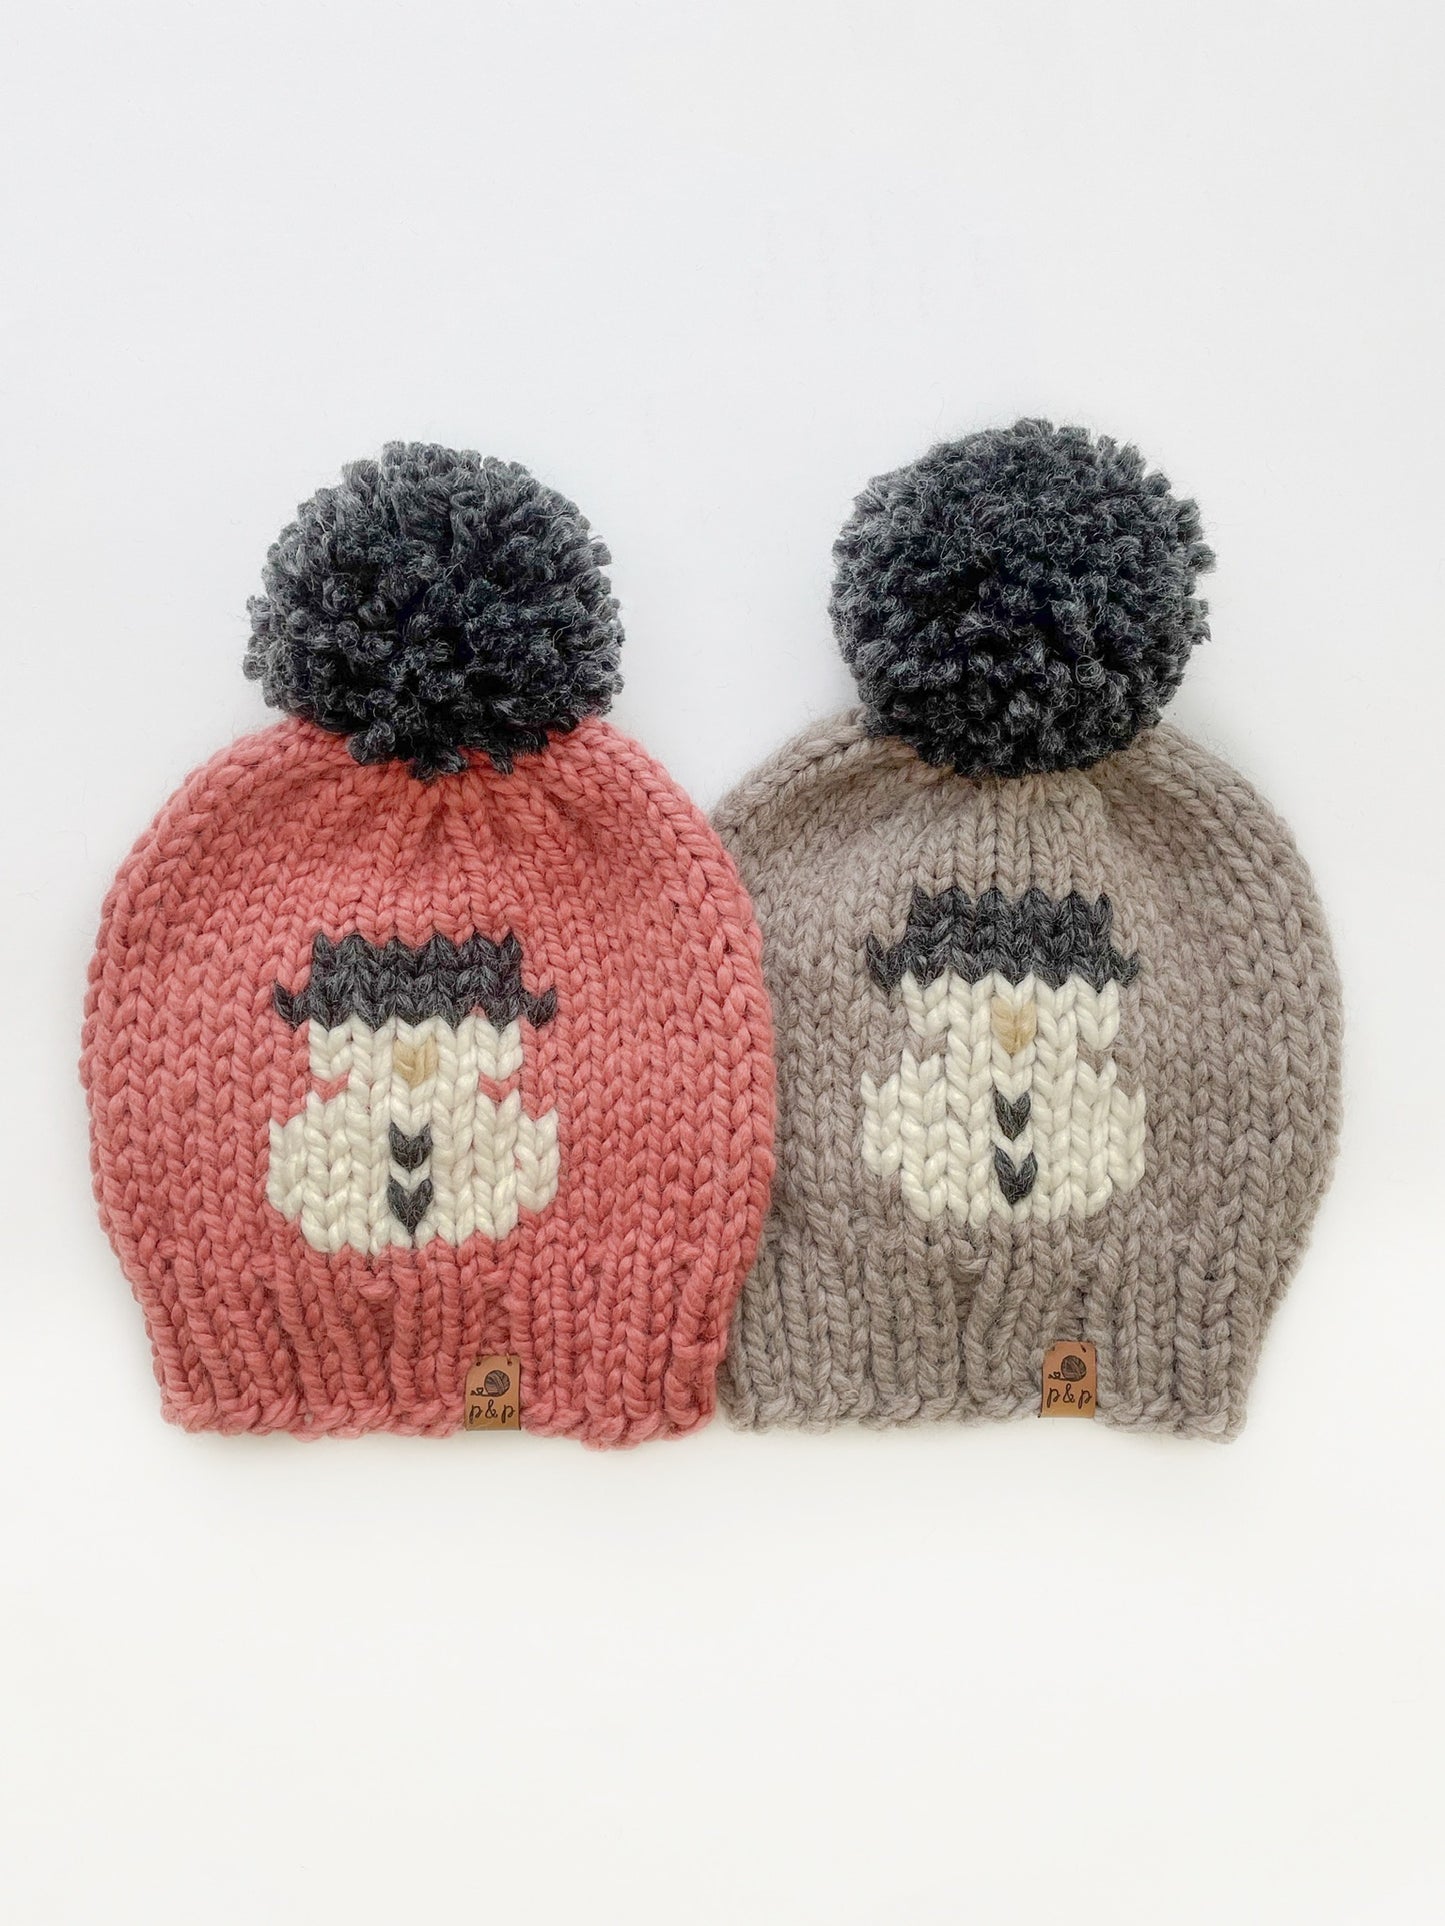 Muted Christmas Hats as pictured